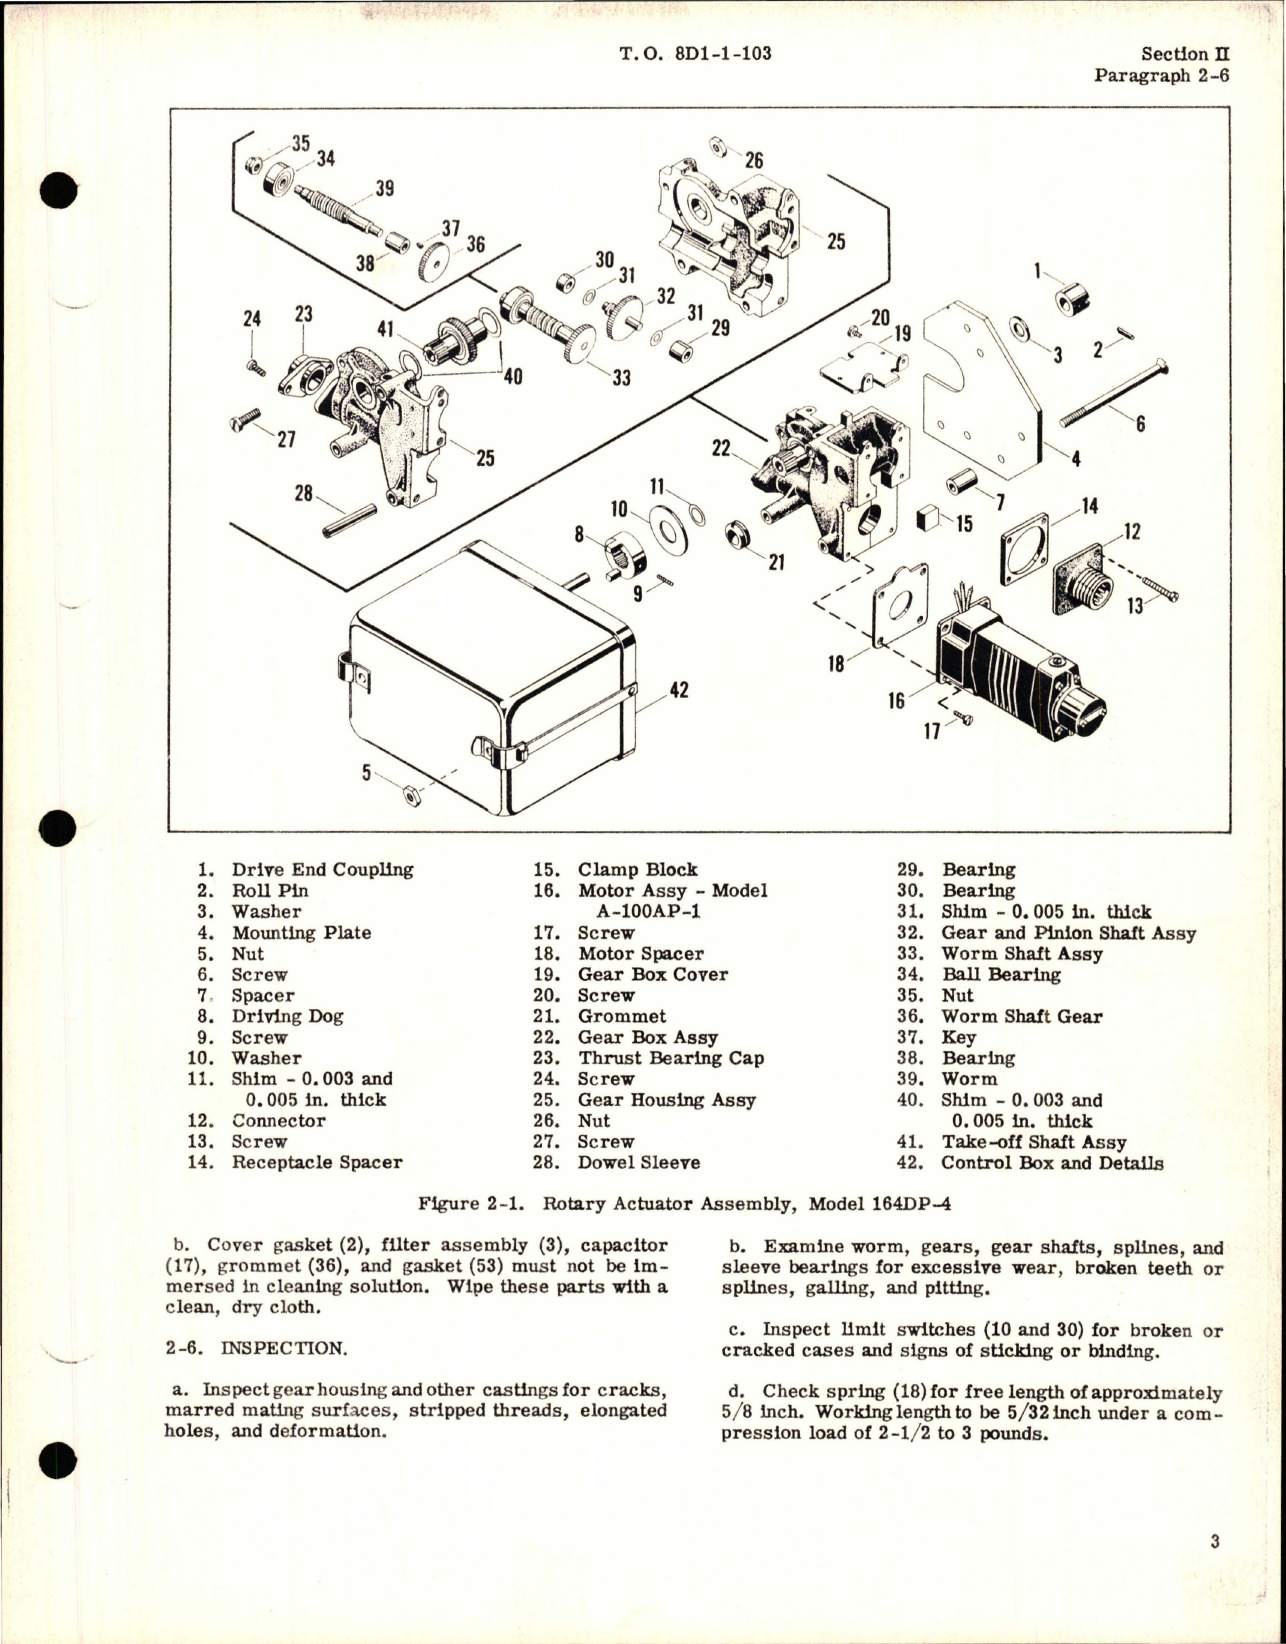 Sample page 5 from AirCorps Library document: Overhaul Instructions for Rotary Actuator 